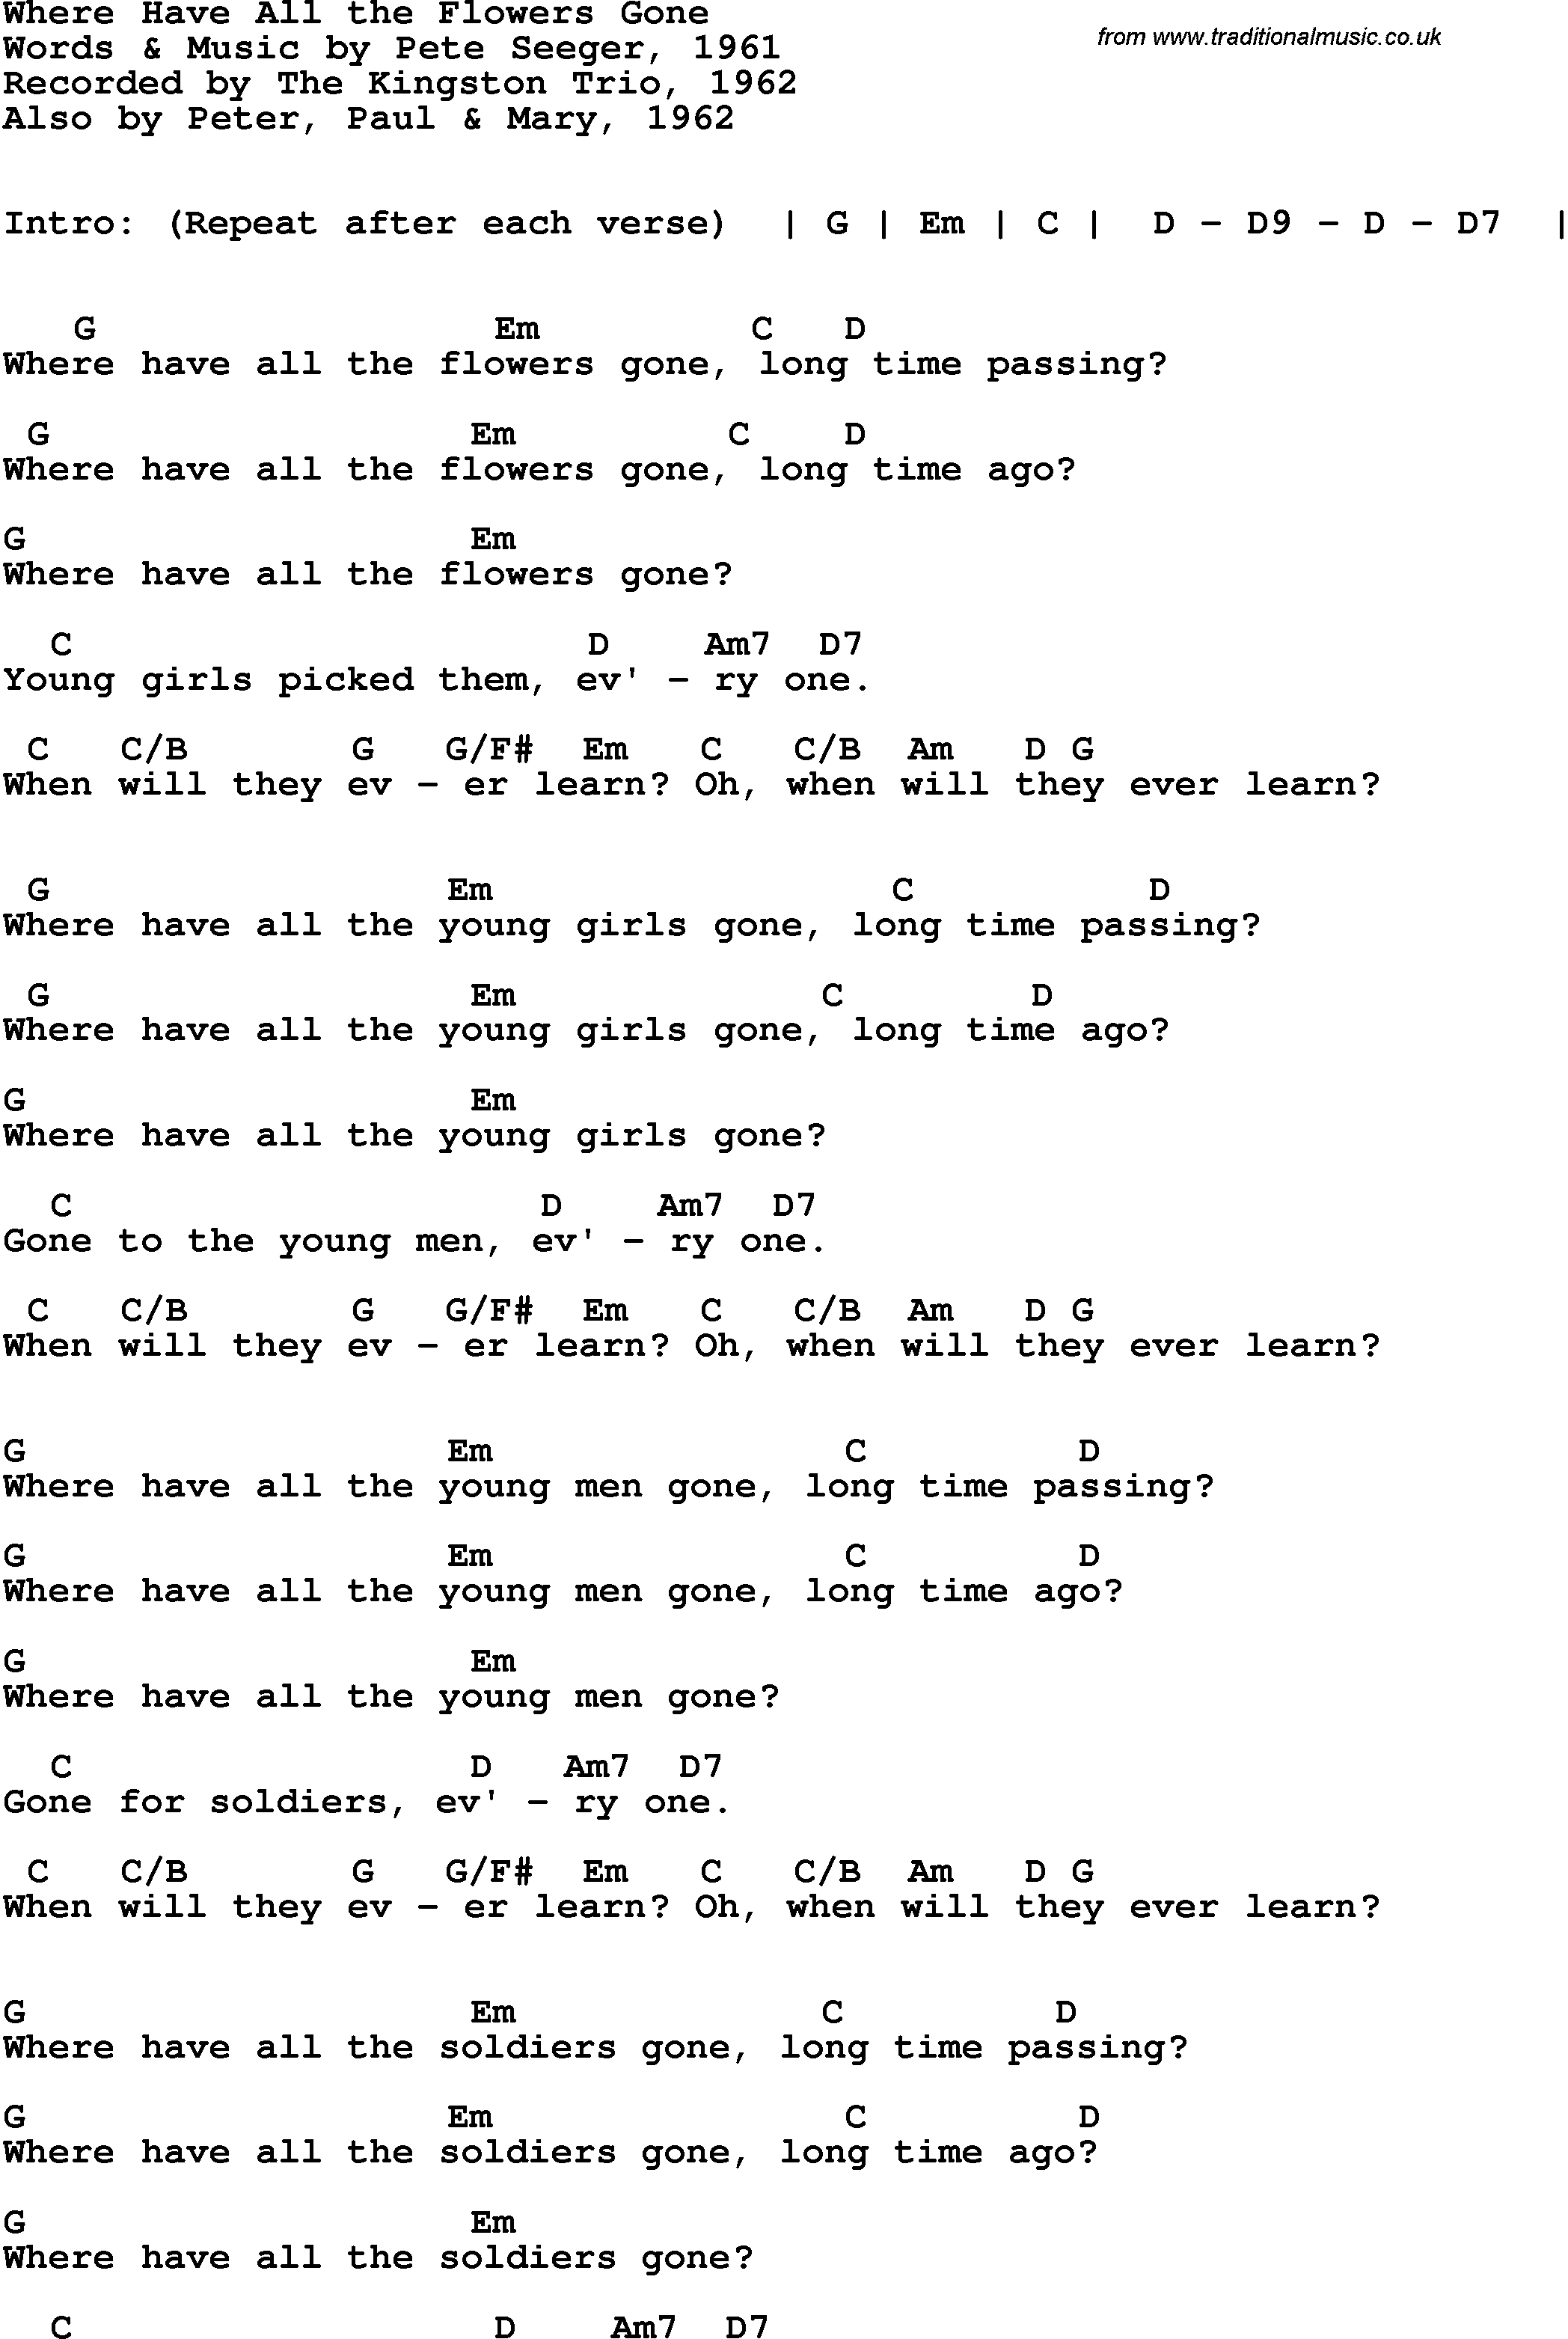 where have all the flowers gone lyrics